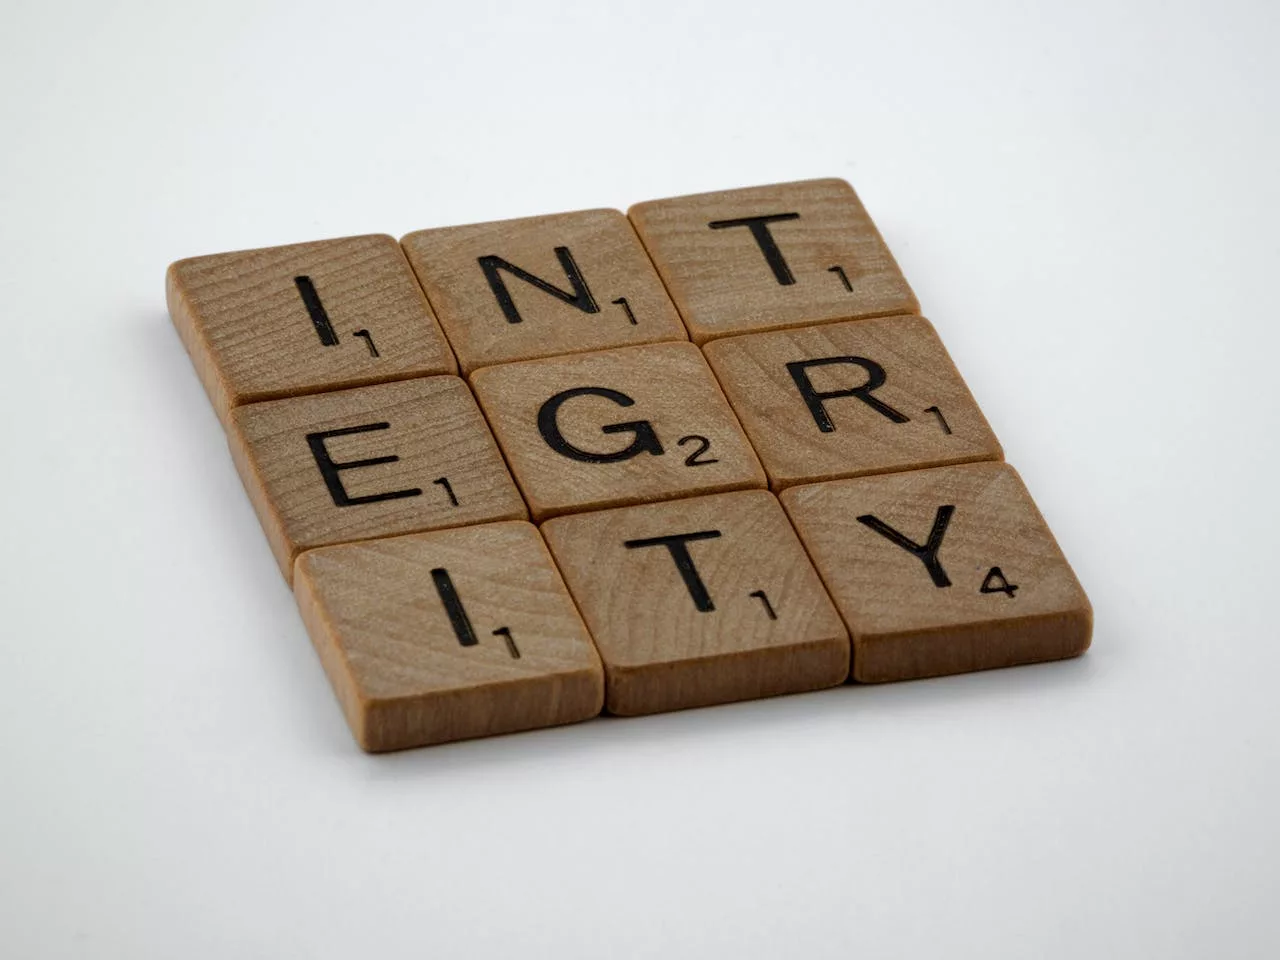 Integrity is a personal choice which refers to the quality of being honest and having strong moral principles